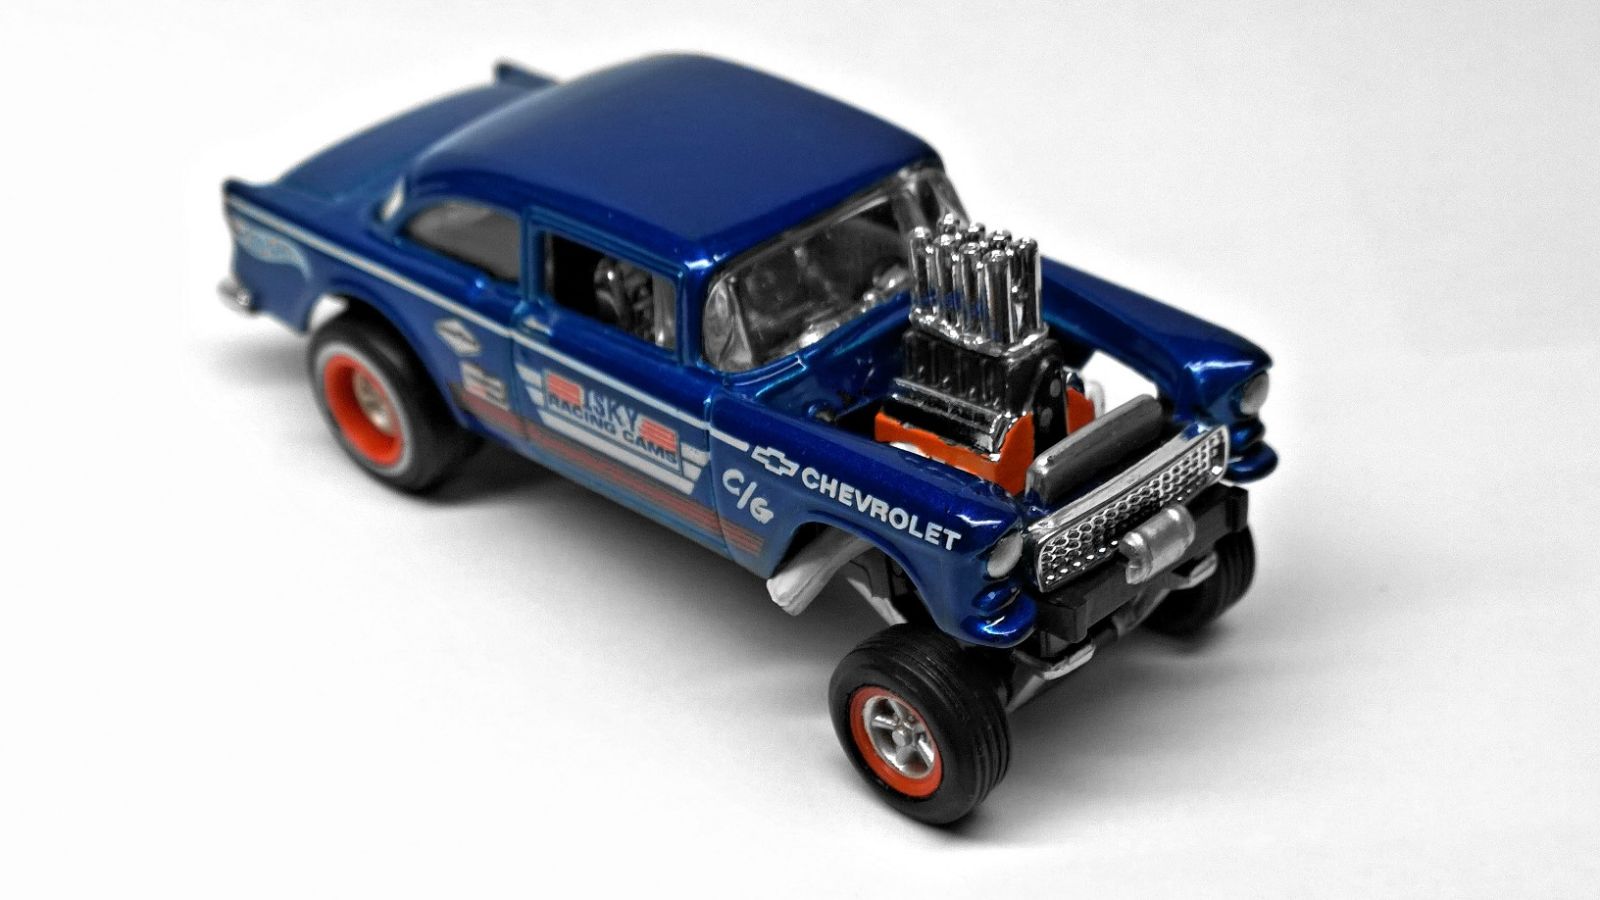 Illustration for article titled CUSTOM! 55 Chevy Gasser mash up part 2! Lots of pics and how-to